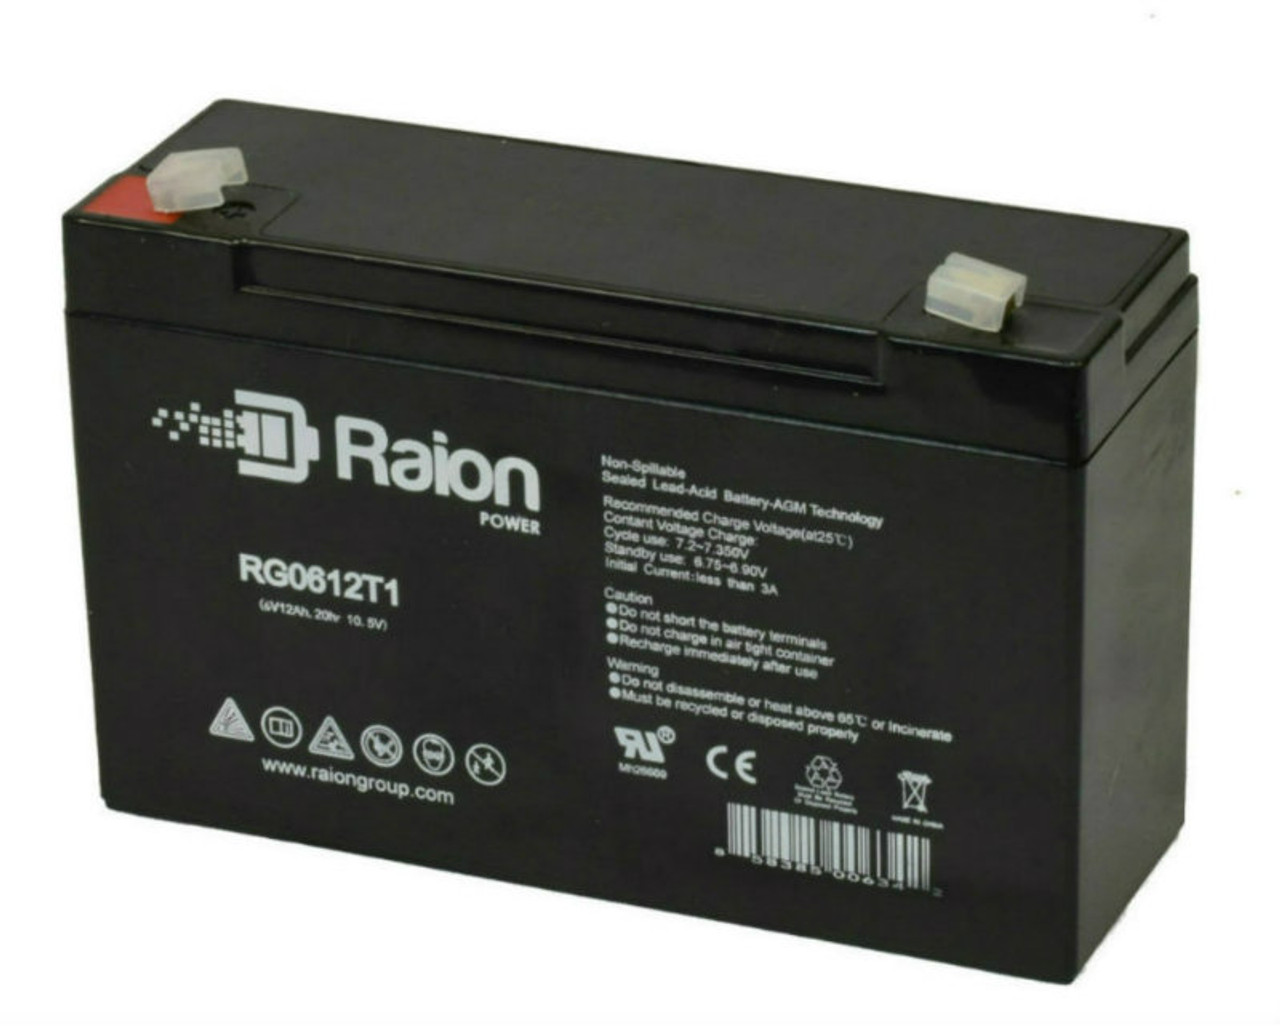 Raion Power RG06120T1 Replacement Emergency Light Battery for Edwards 1631